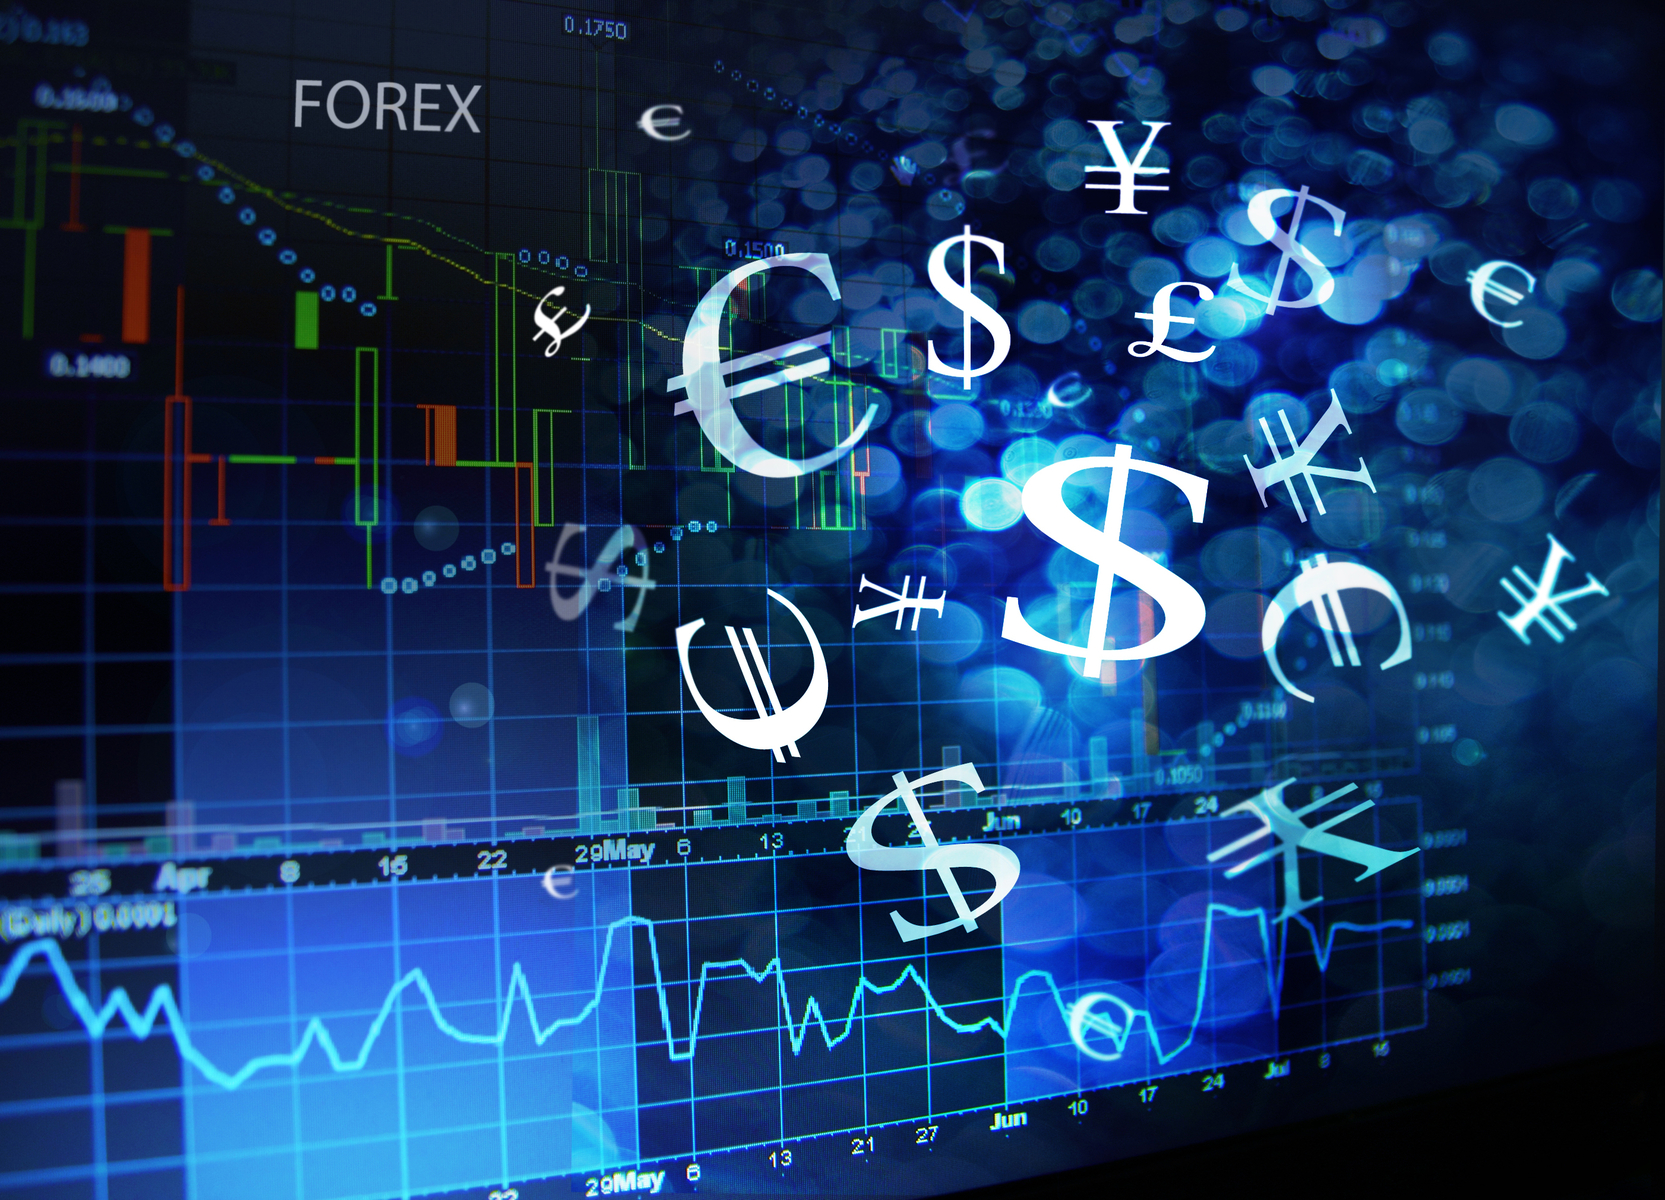 Forex news that move the market